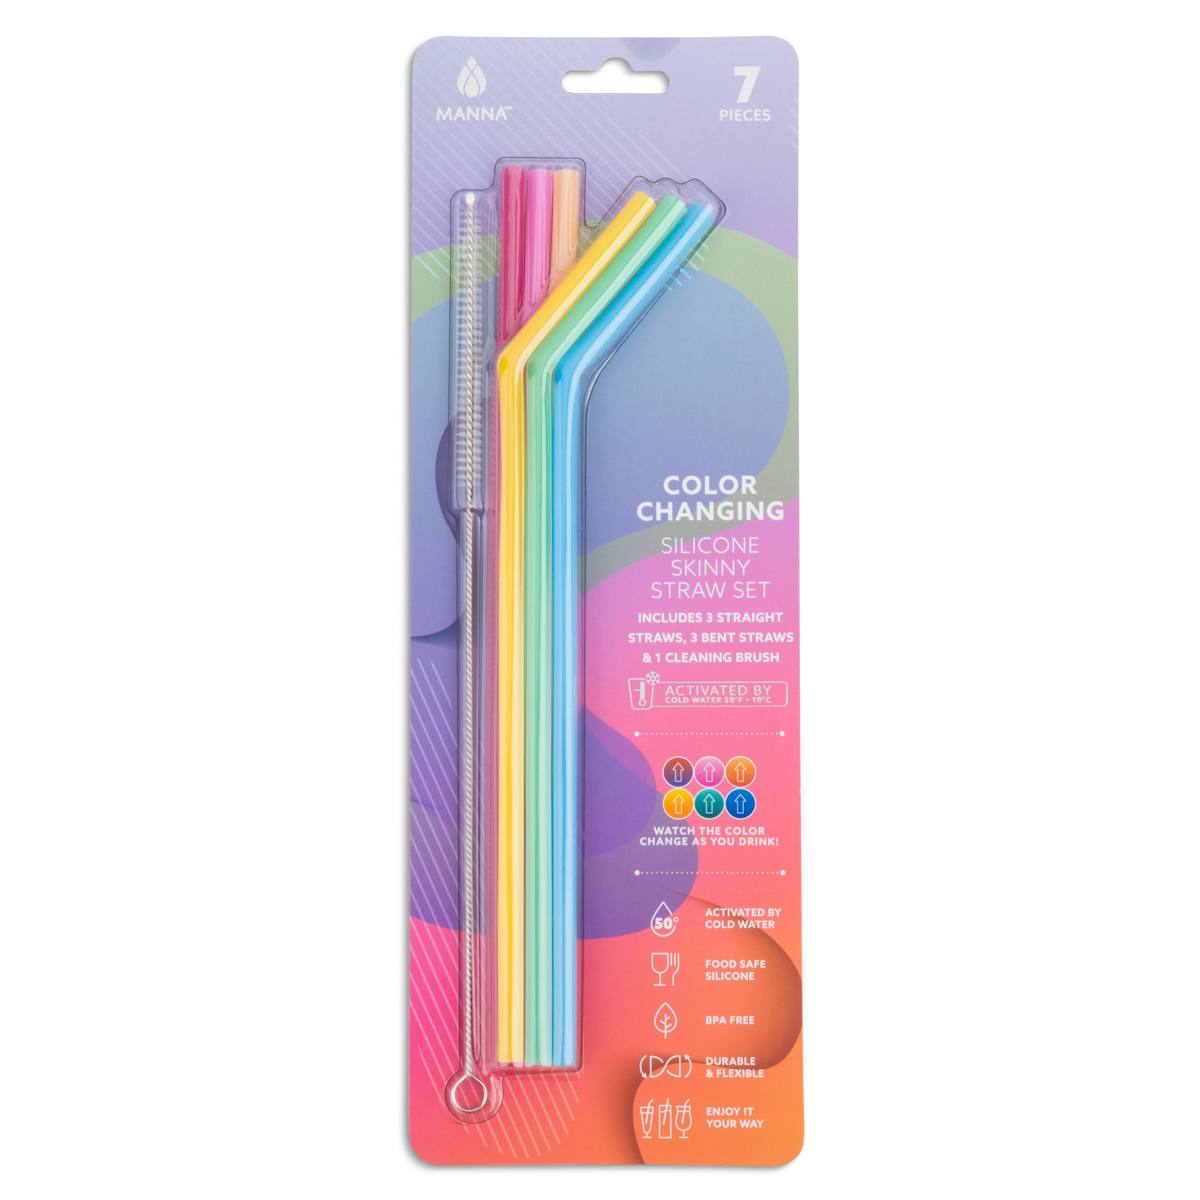 Manna Color-Changing Silicone Skinny Straws & Cleaning Brush 7pc Set